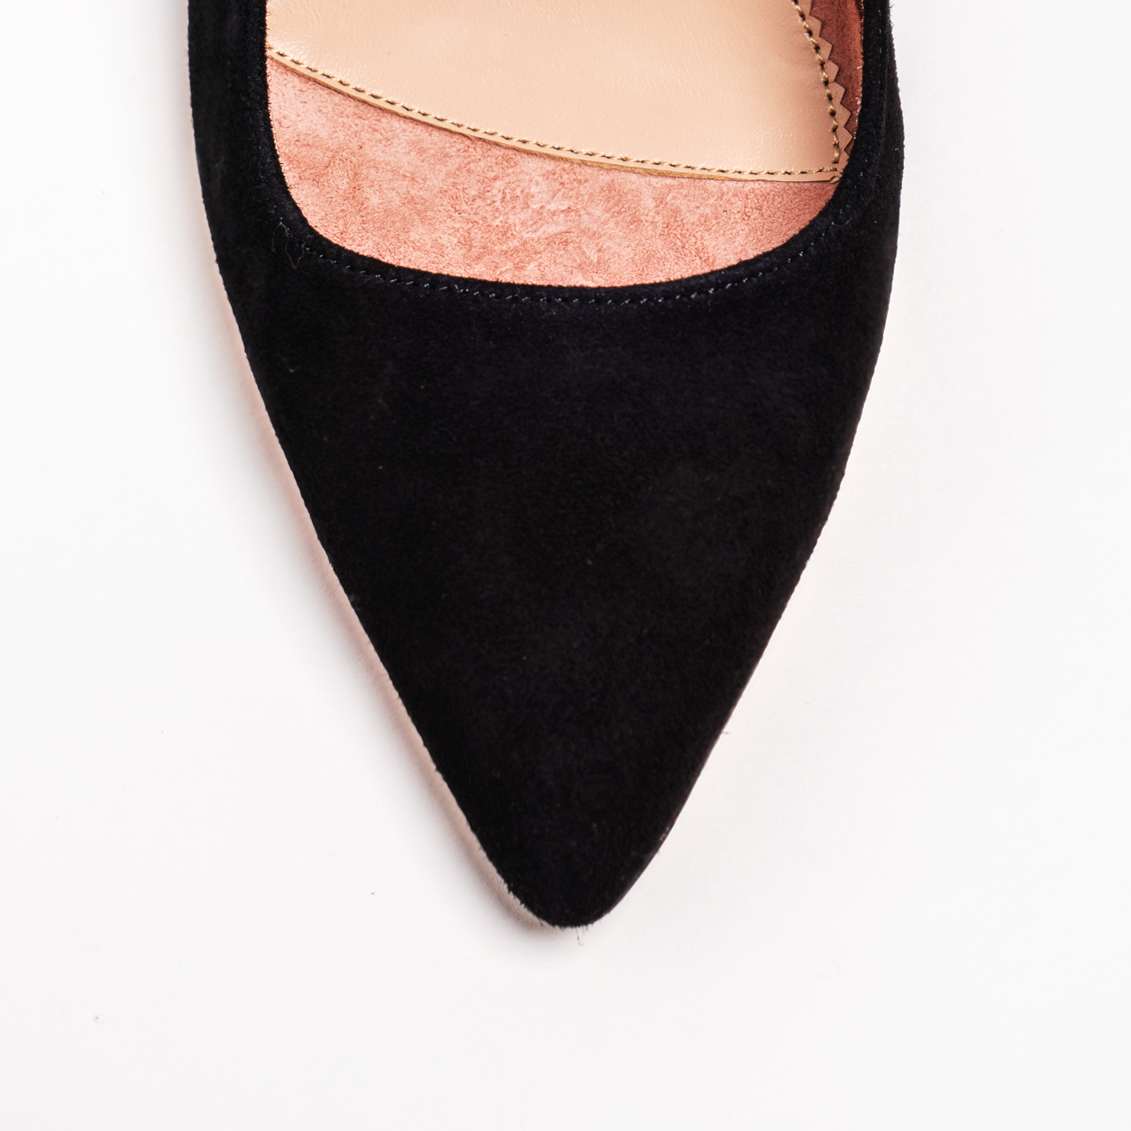 Women' Business Suede Lower Block Heel - Black NORA GARDNER | OFFICIAL STORE for work and office